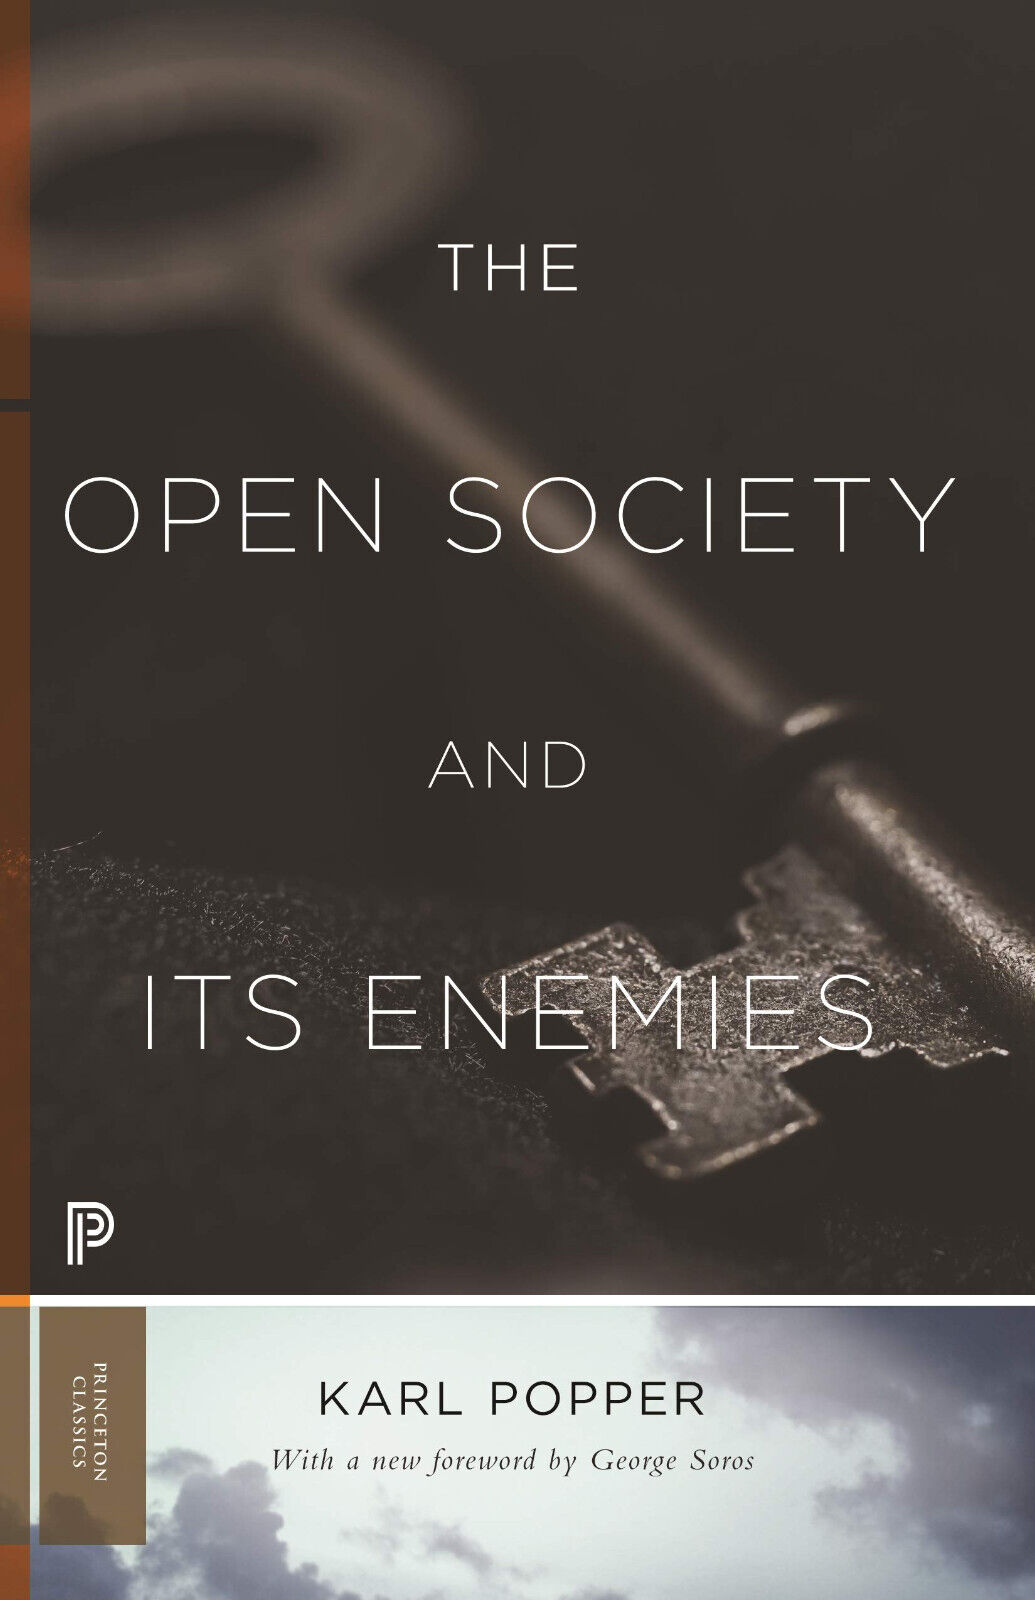 The Open Society and Its Enemies - Karl R. Popper - Princenton, 2020